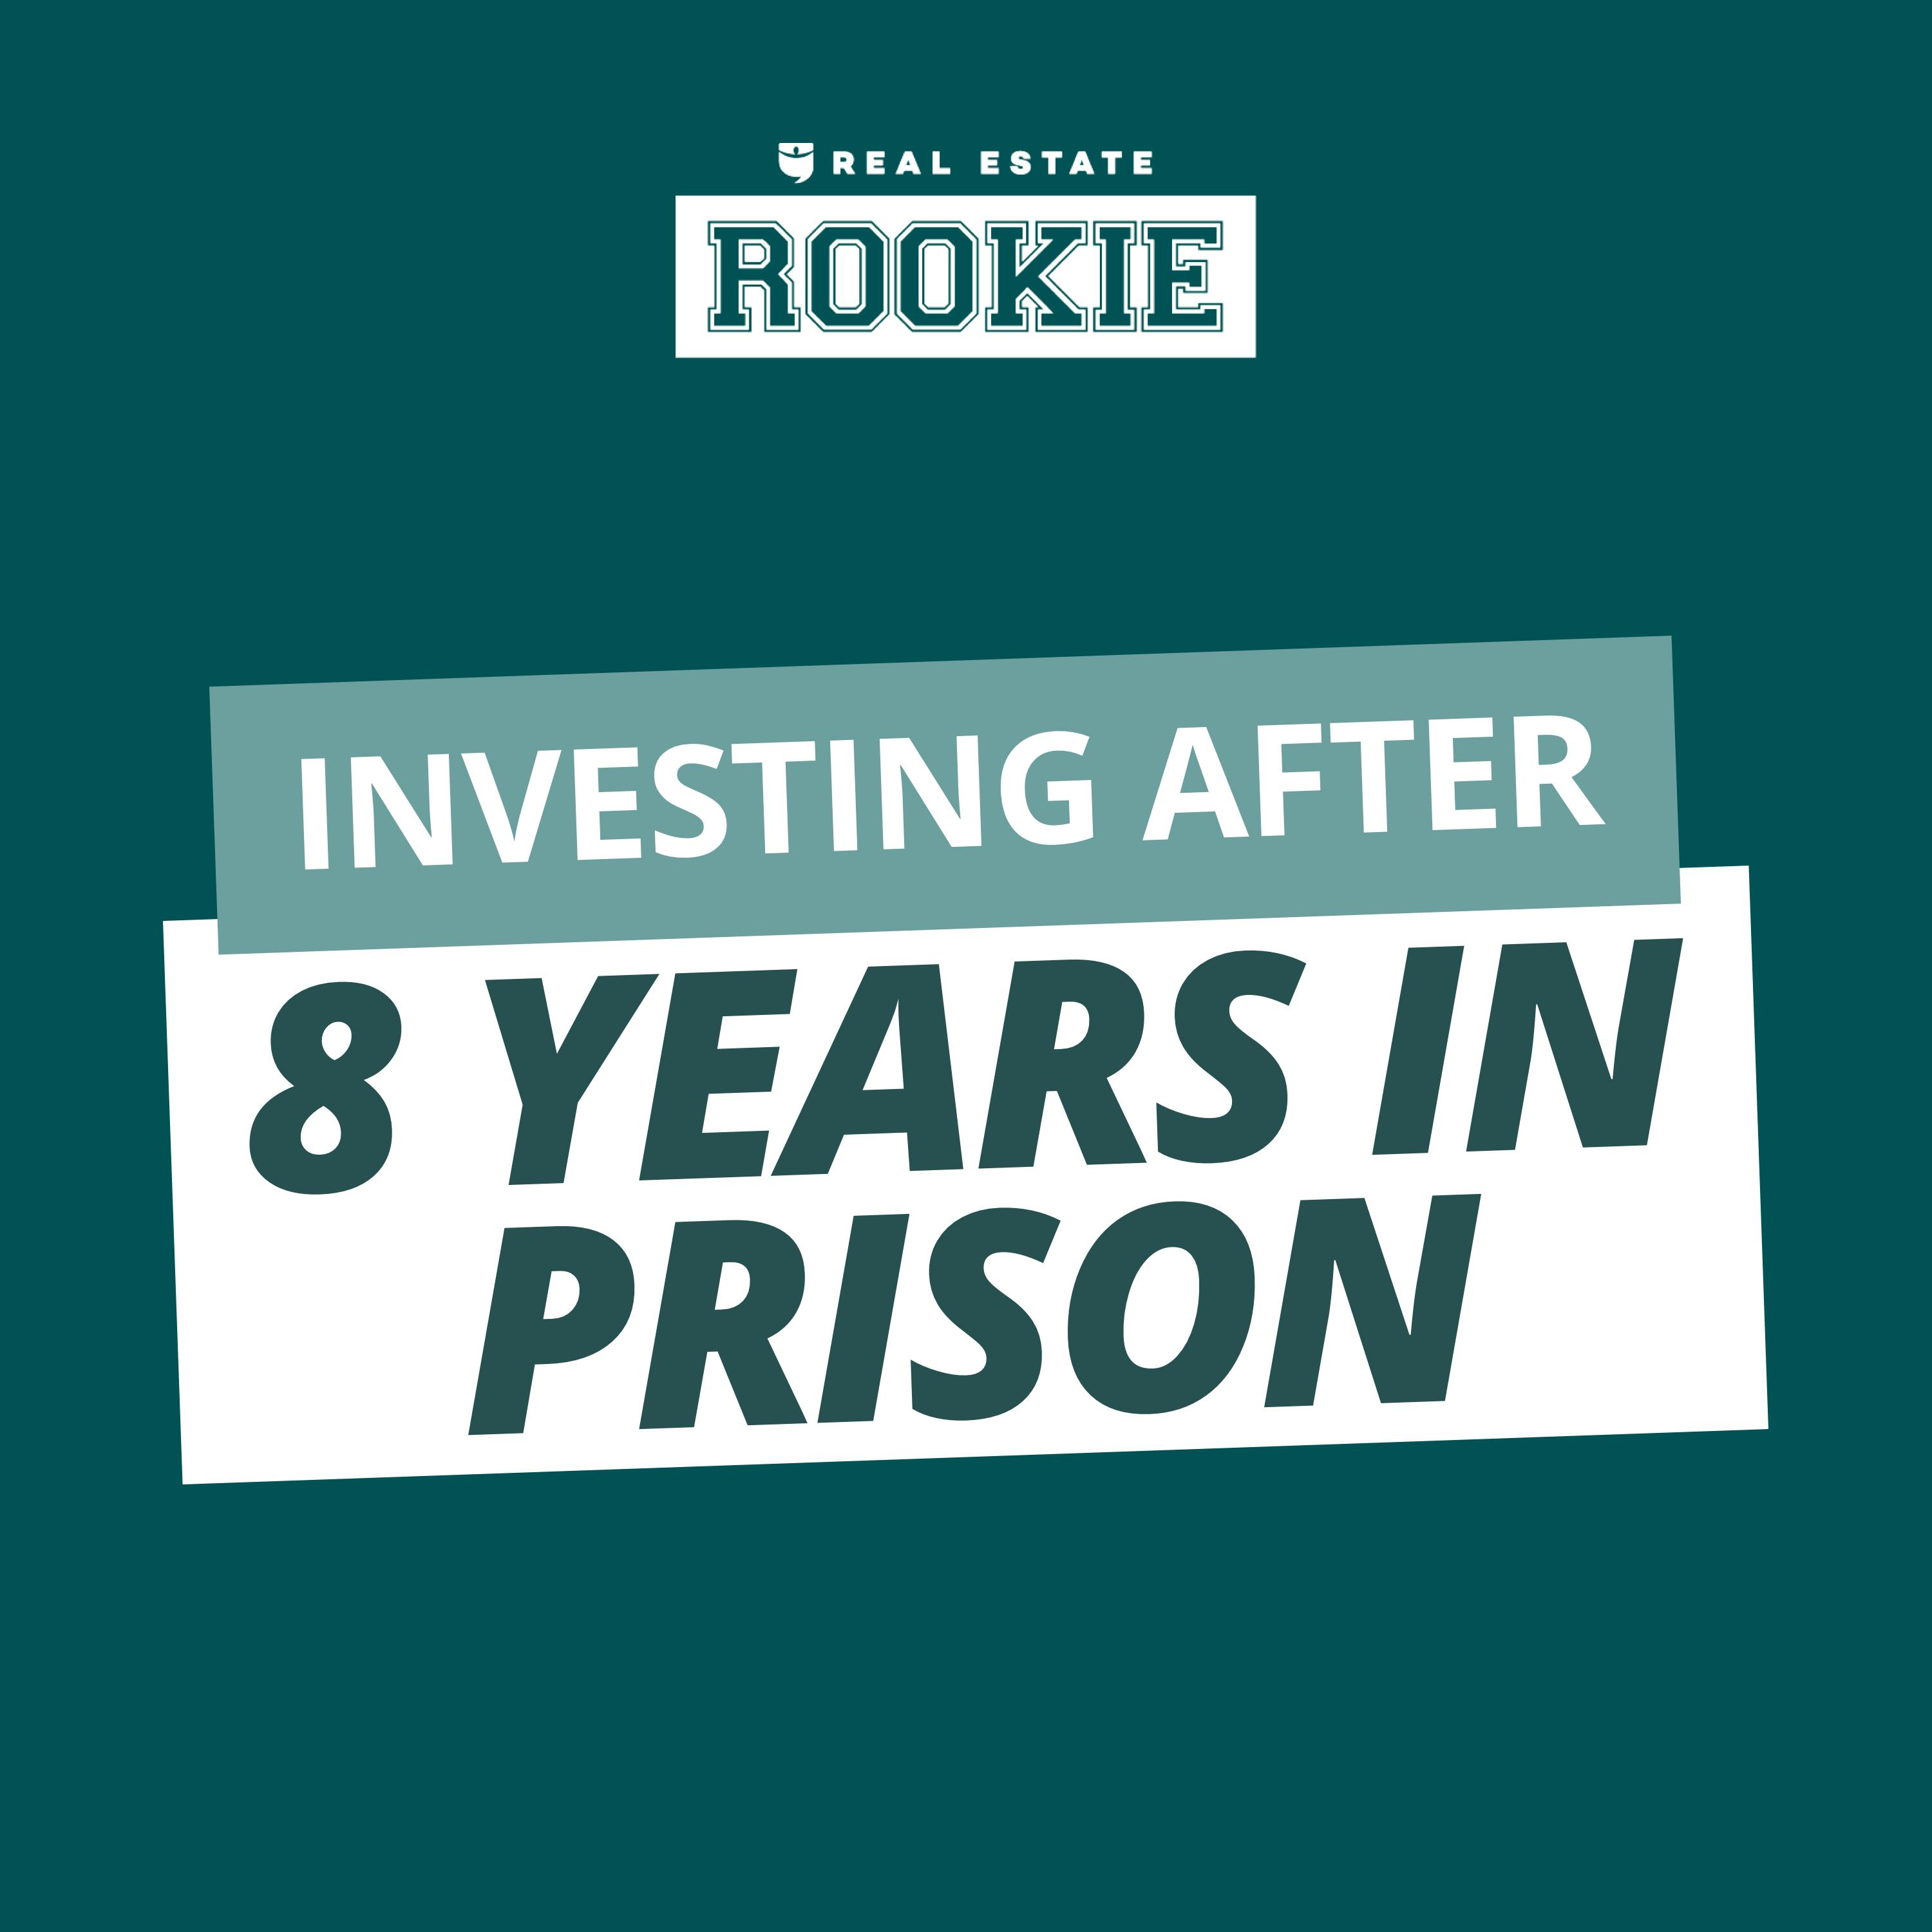 129: 5 Properties After Spending 8 Years in Prison (With ZERO Credit!)